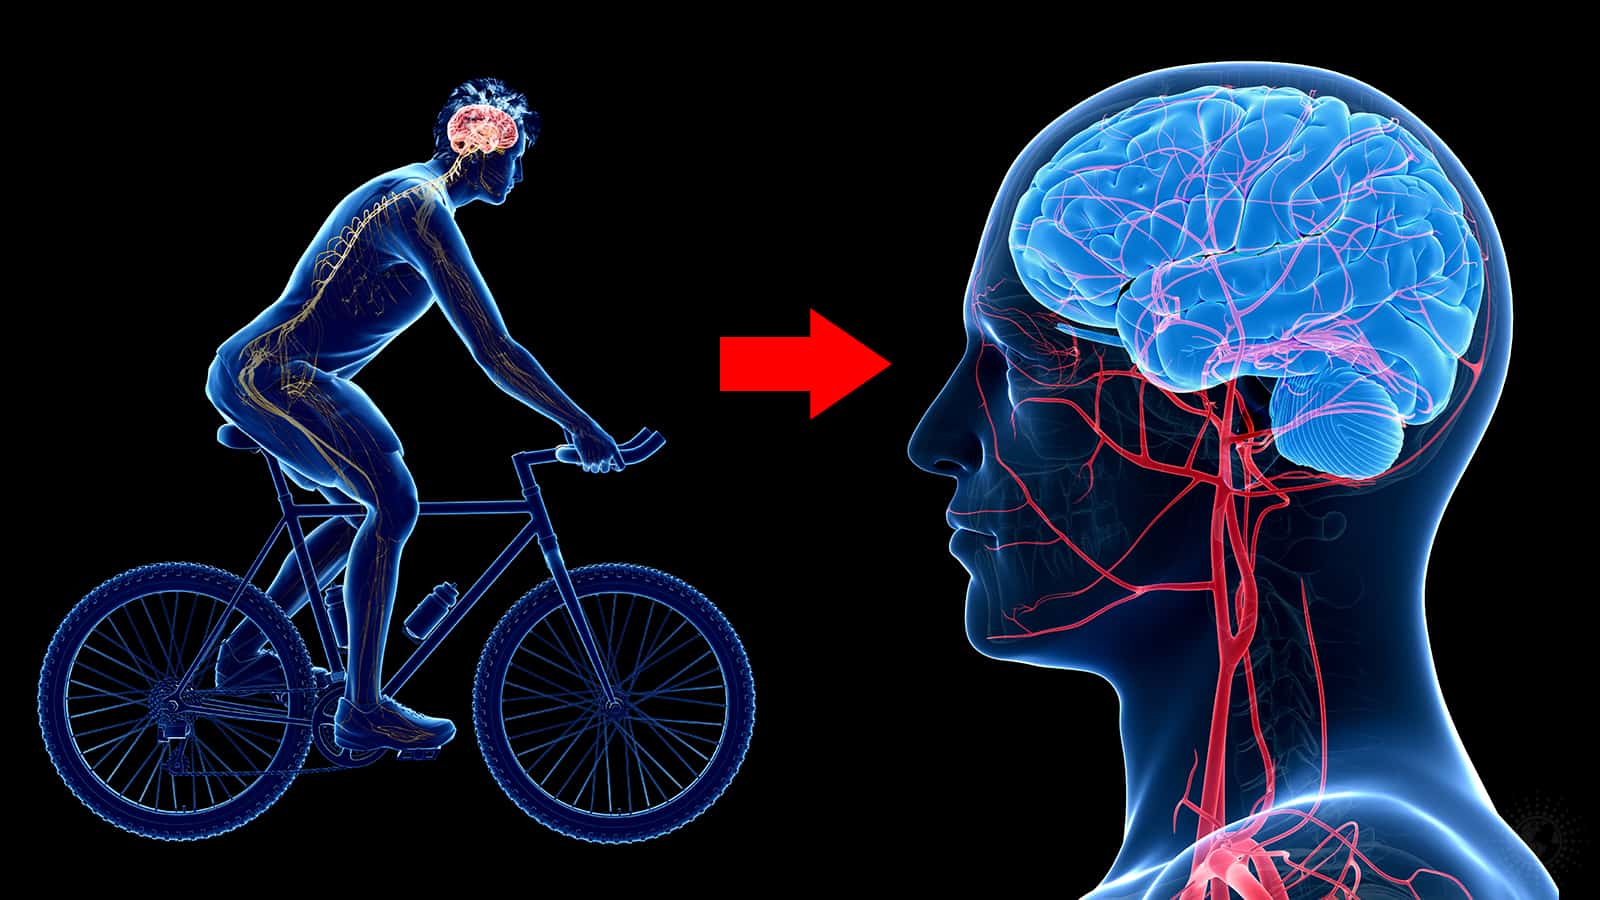 Scientists Explain How Exercise Can Protect The Brain Against Depression And Anxiety